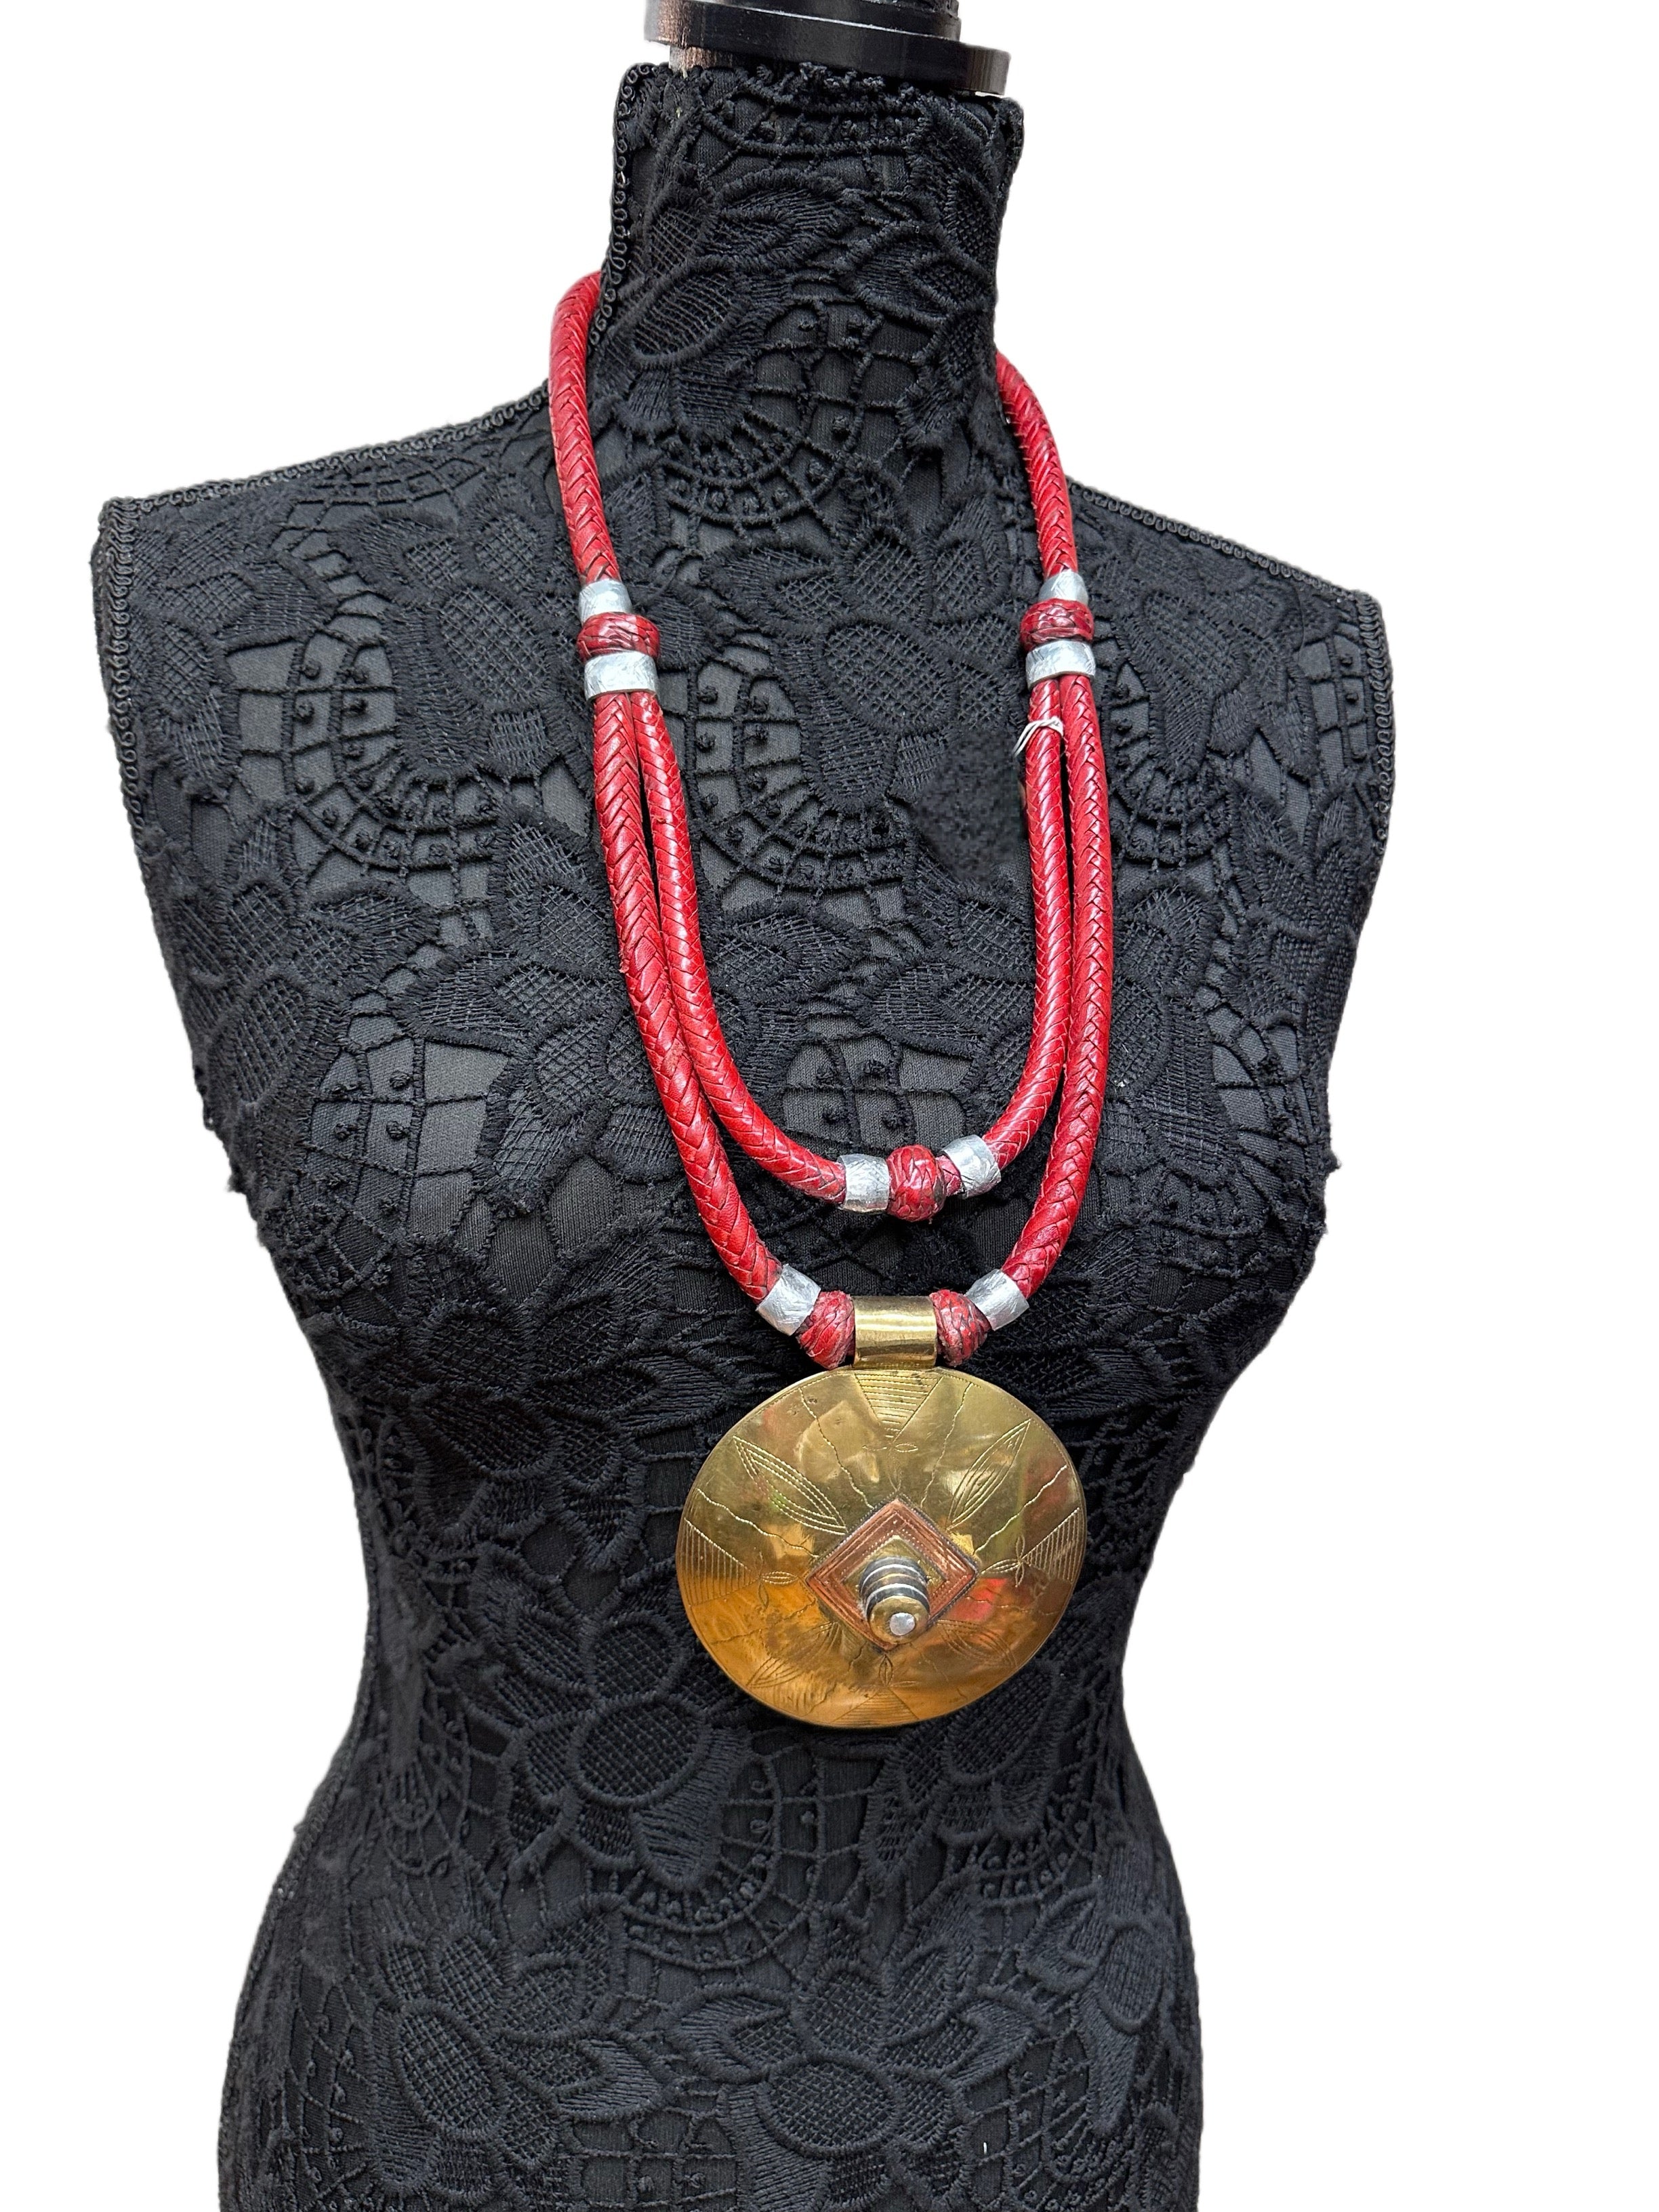 Red Leather Layered Necklace Large Metal Pendant